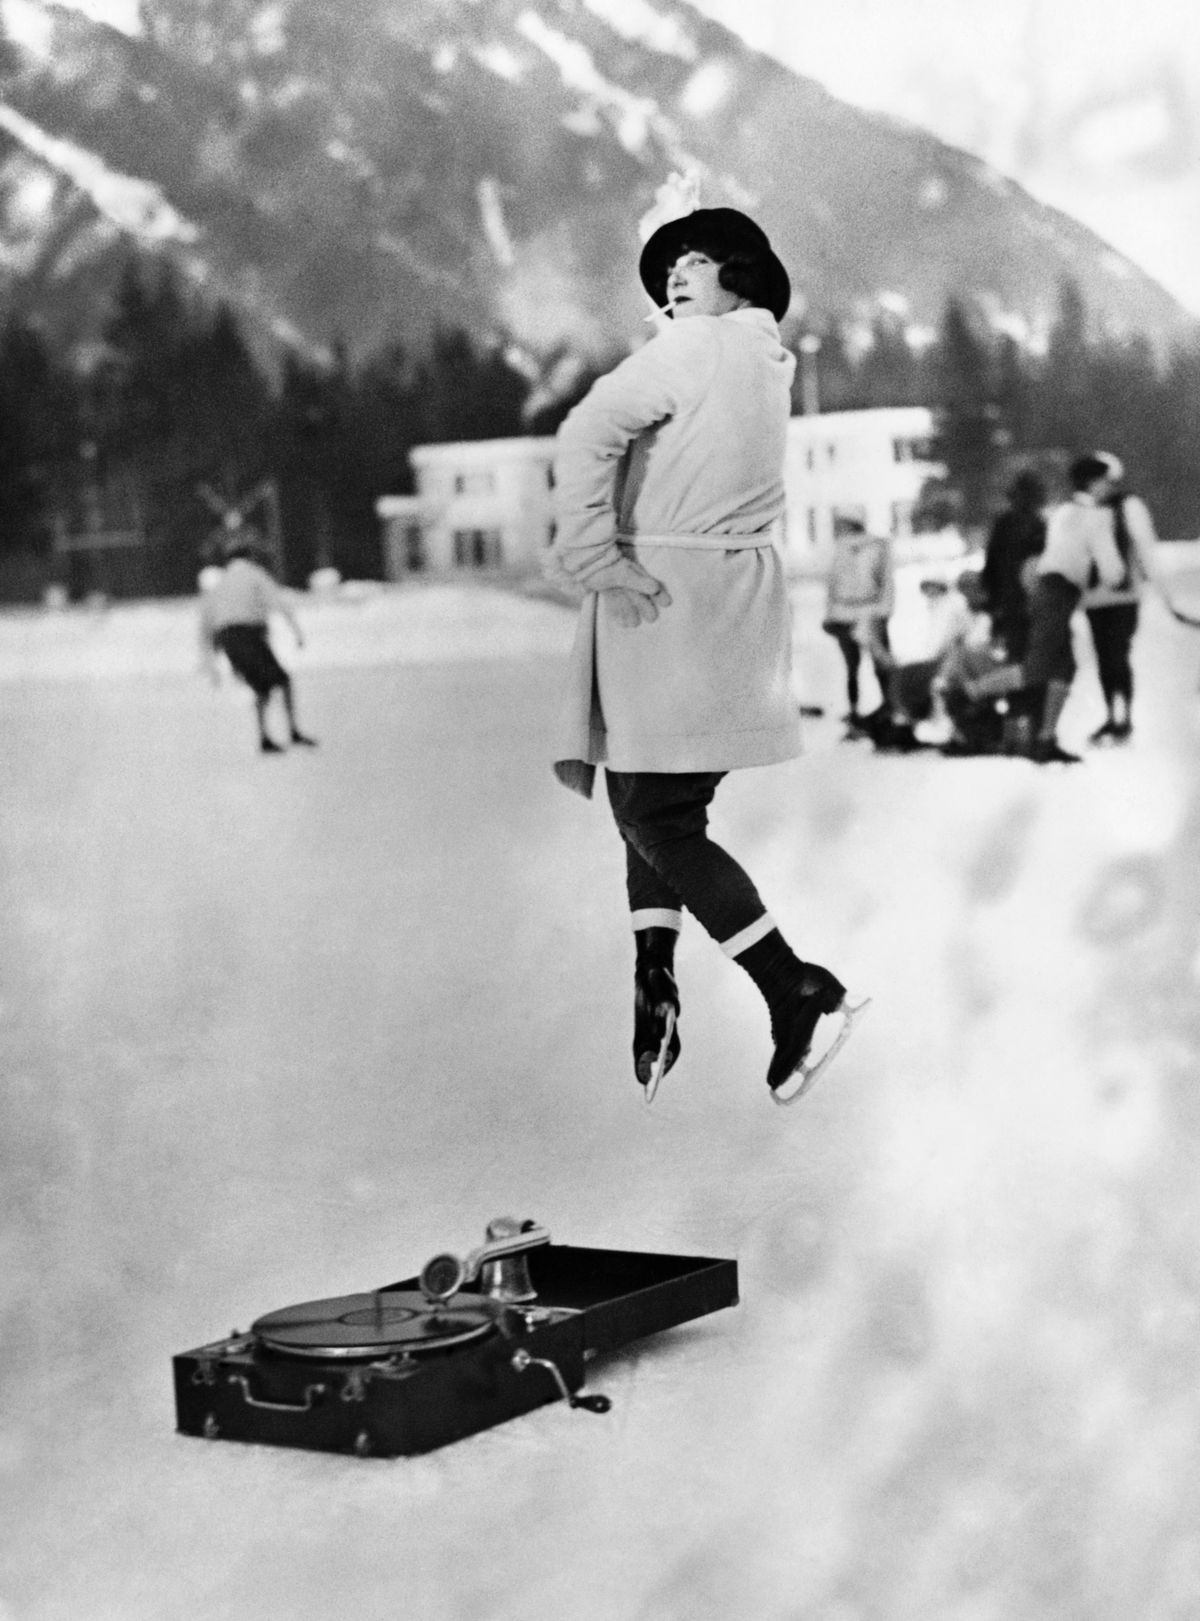 A Lady Dancing To A Phonograph On The Ice At Chamonix, 1924
Lugas